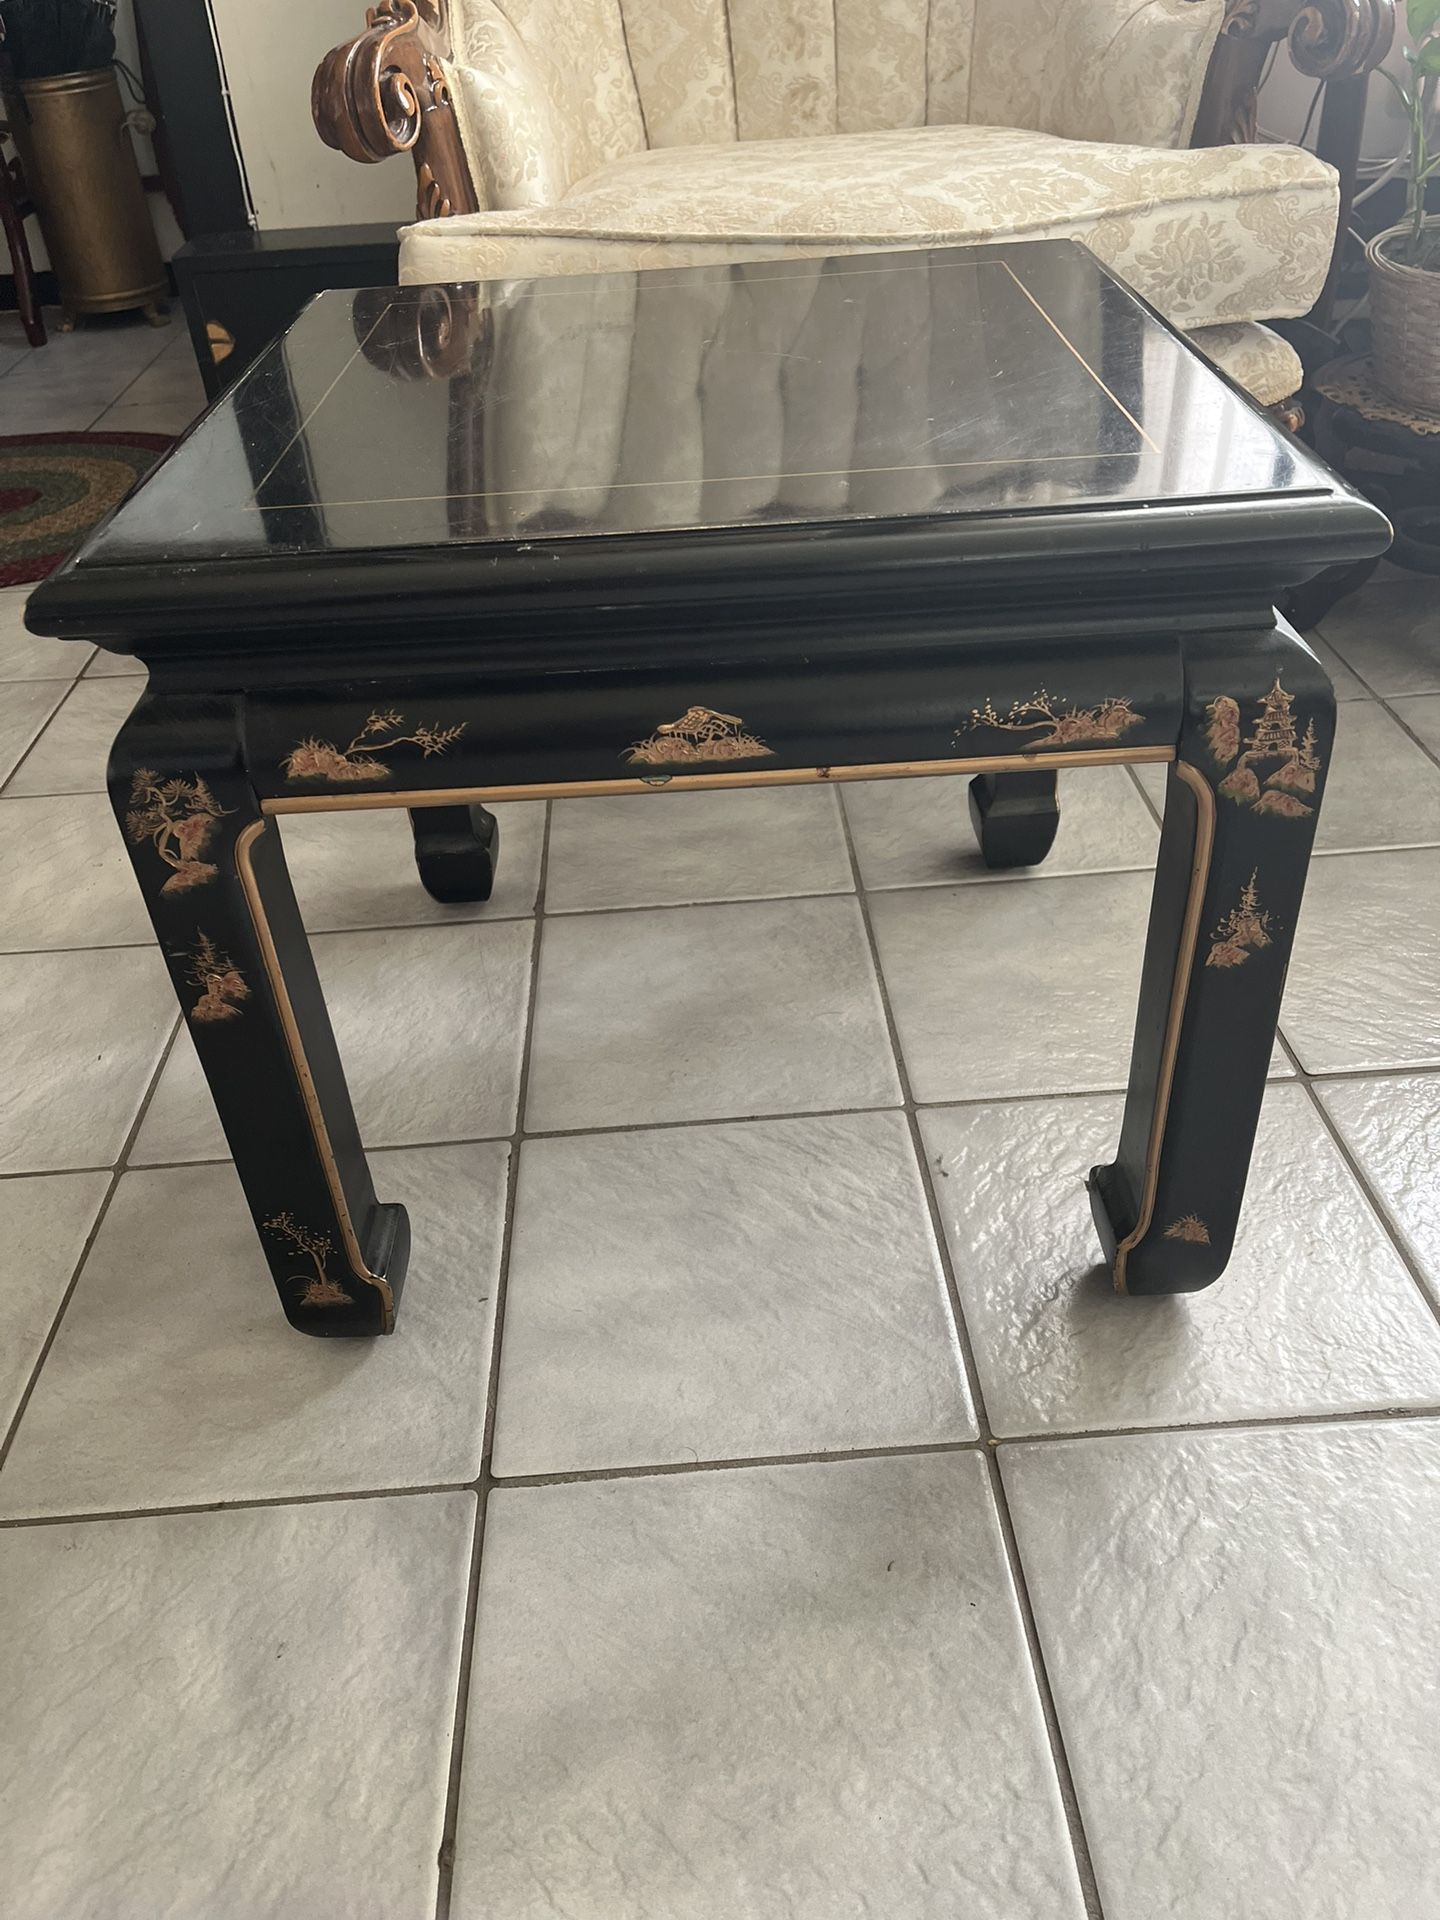 Pair of Solid Wood Asian tables approx H17”W20”x20”